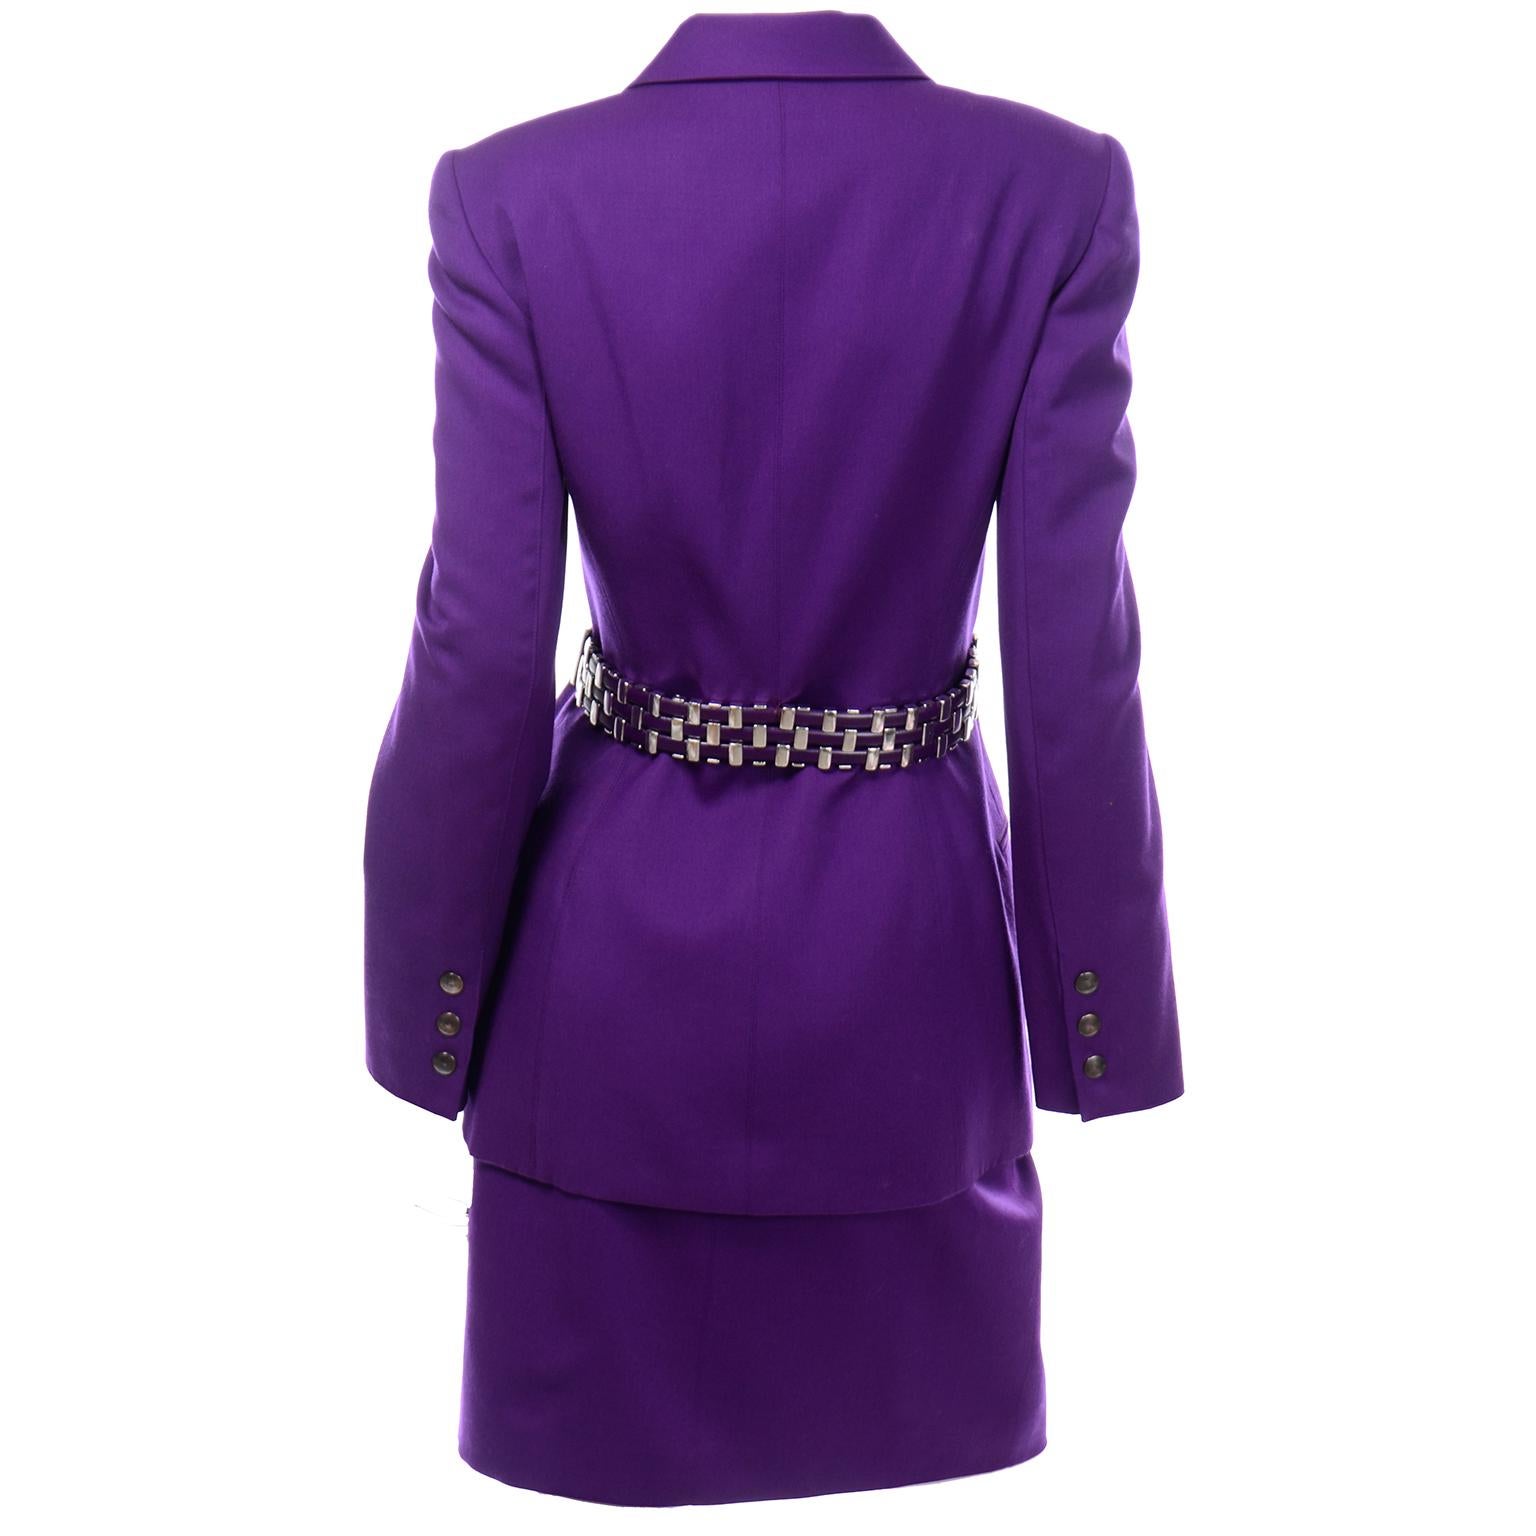 This is a fabulous Claude Montana vintage 1990's purple wool skirt suit with silver hardware & leather back belt attached to the jacket. You can wear this outfit as a suit or break up the set for 2 great separates! This incredible suit has a